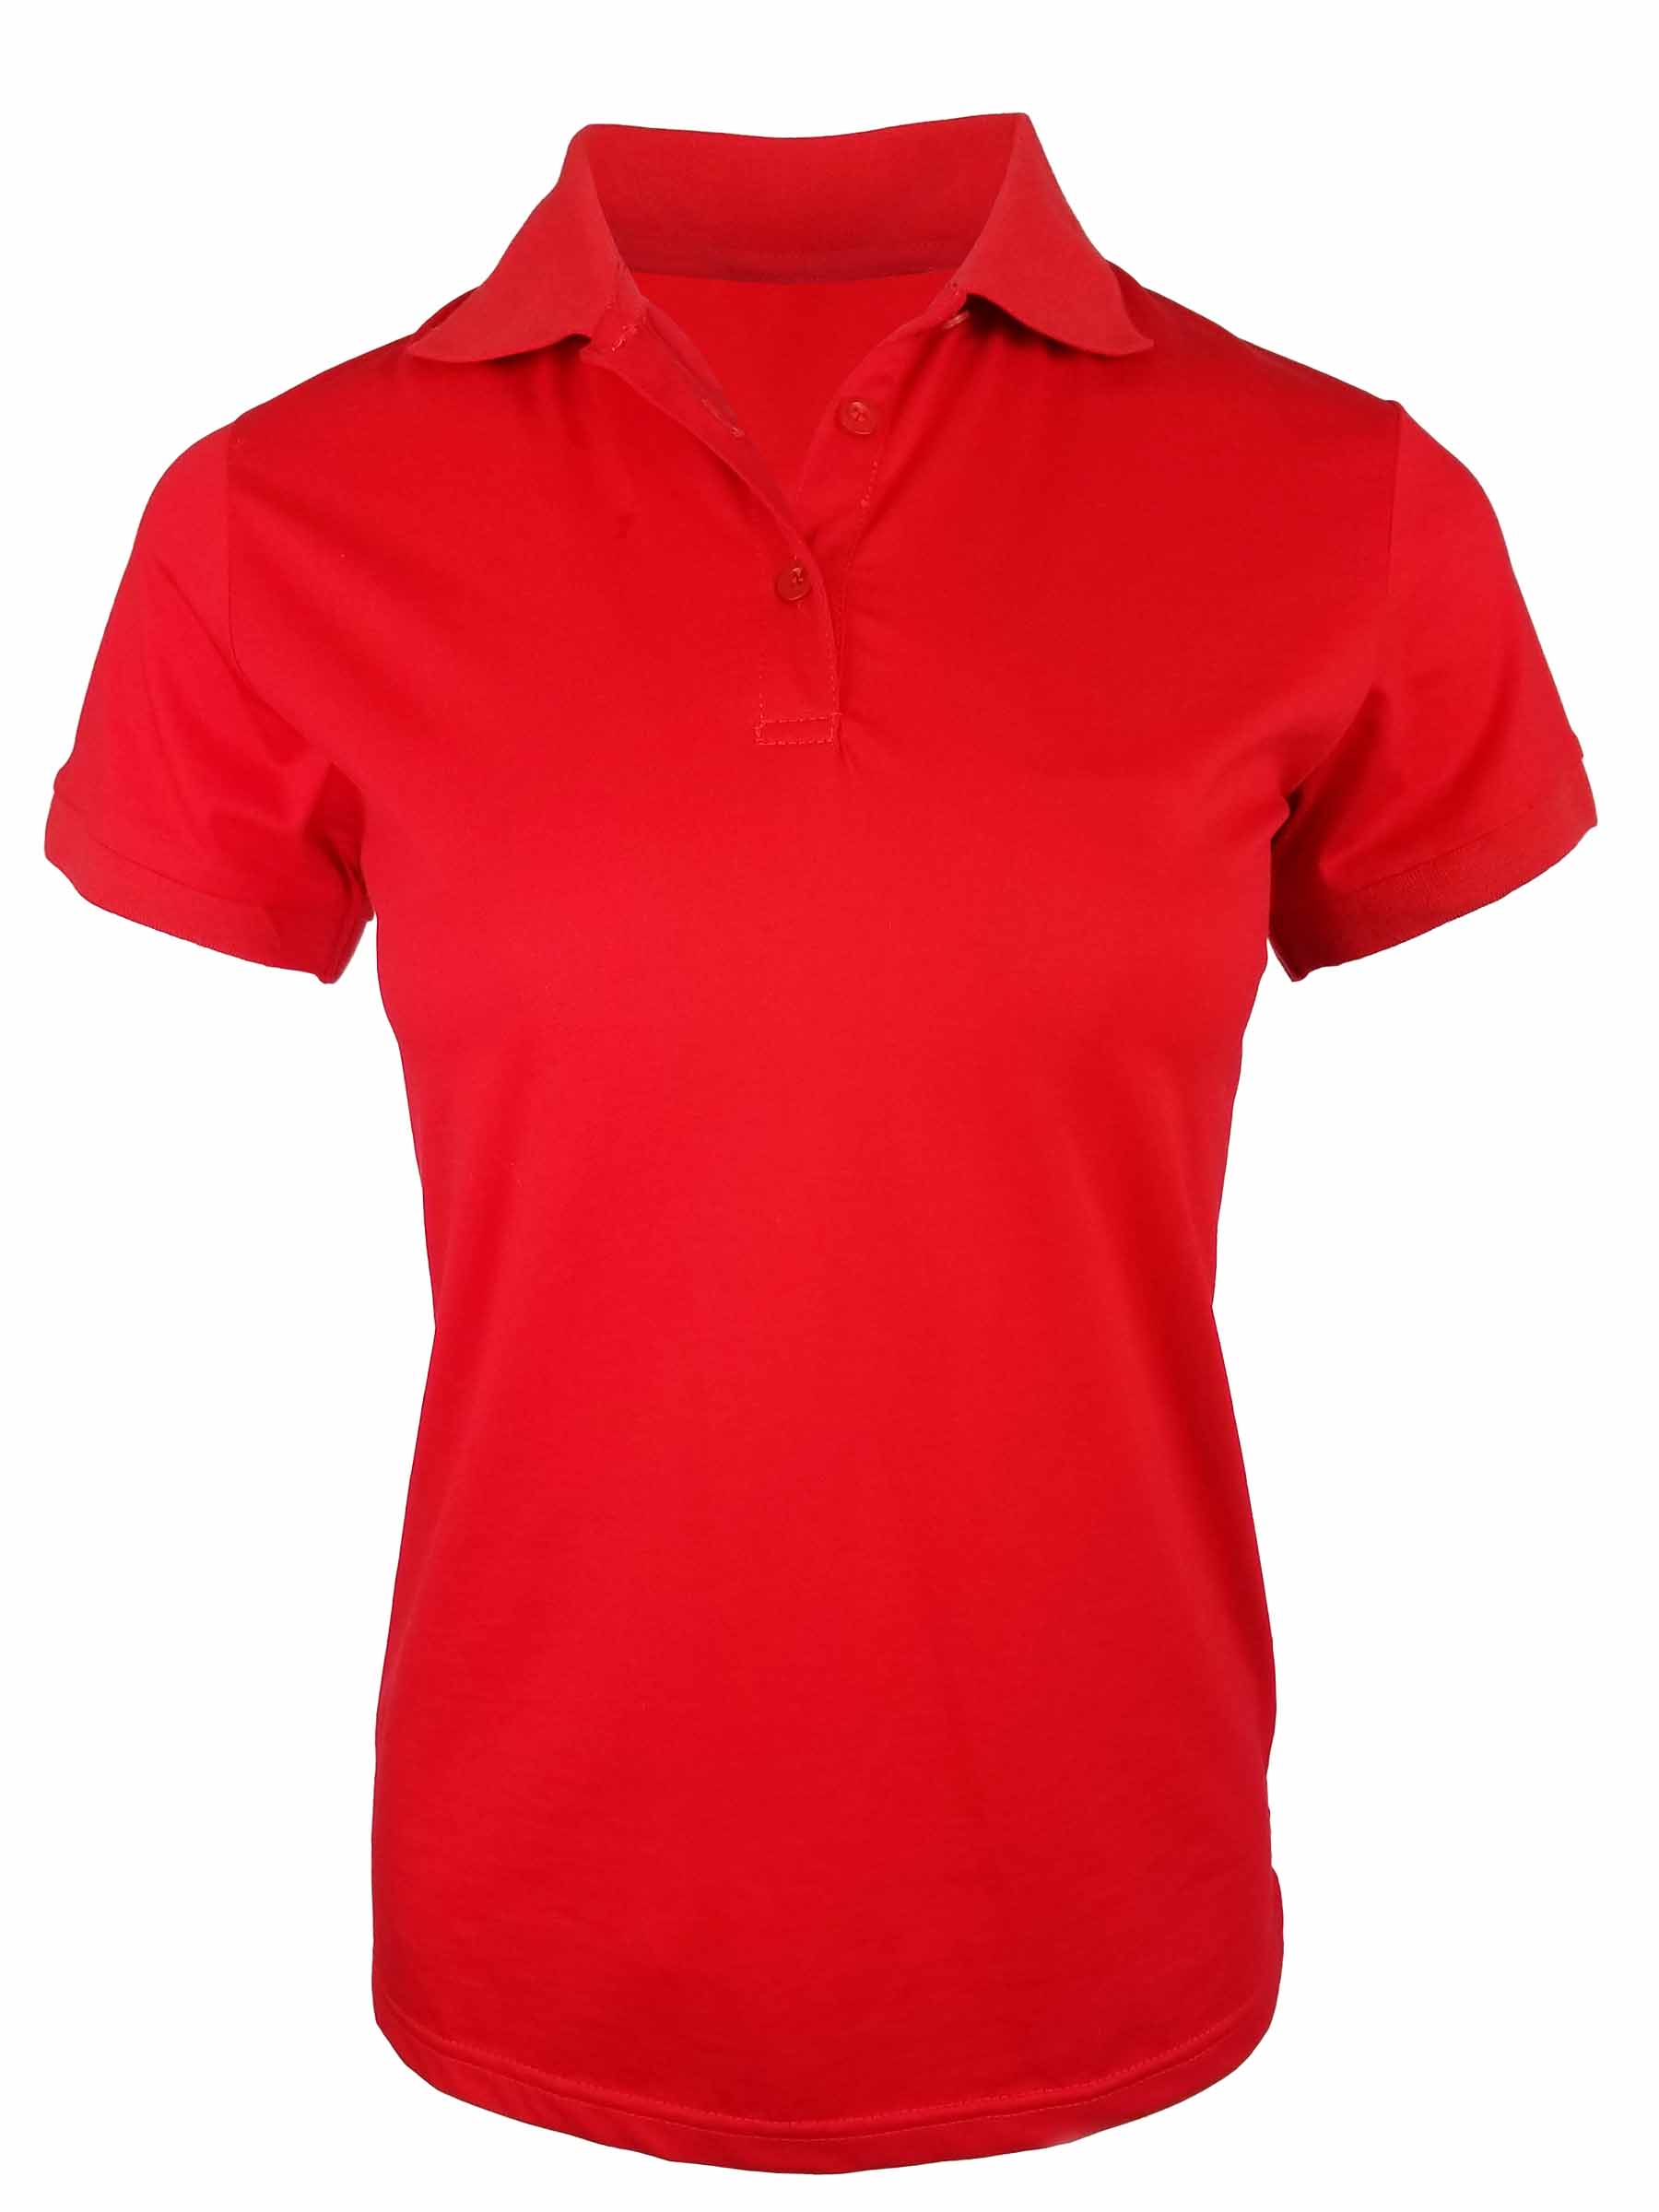 Women's All Occasion Mercerized Polo - Red - Uniform Edit